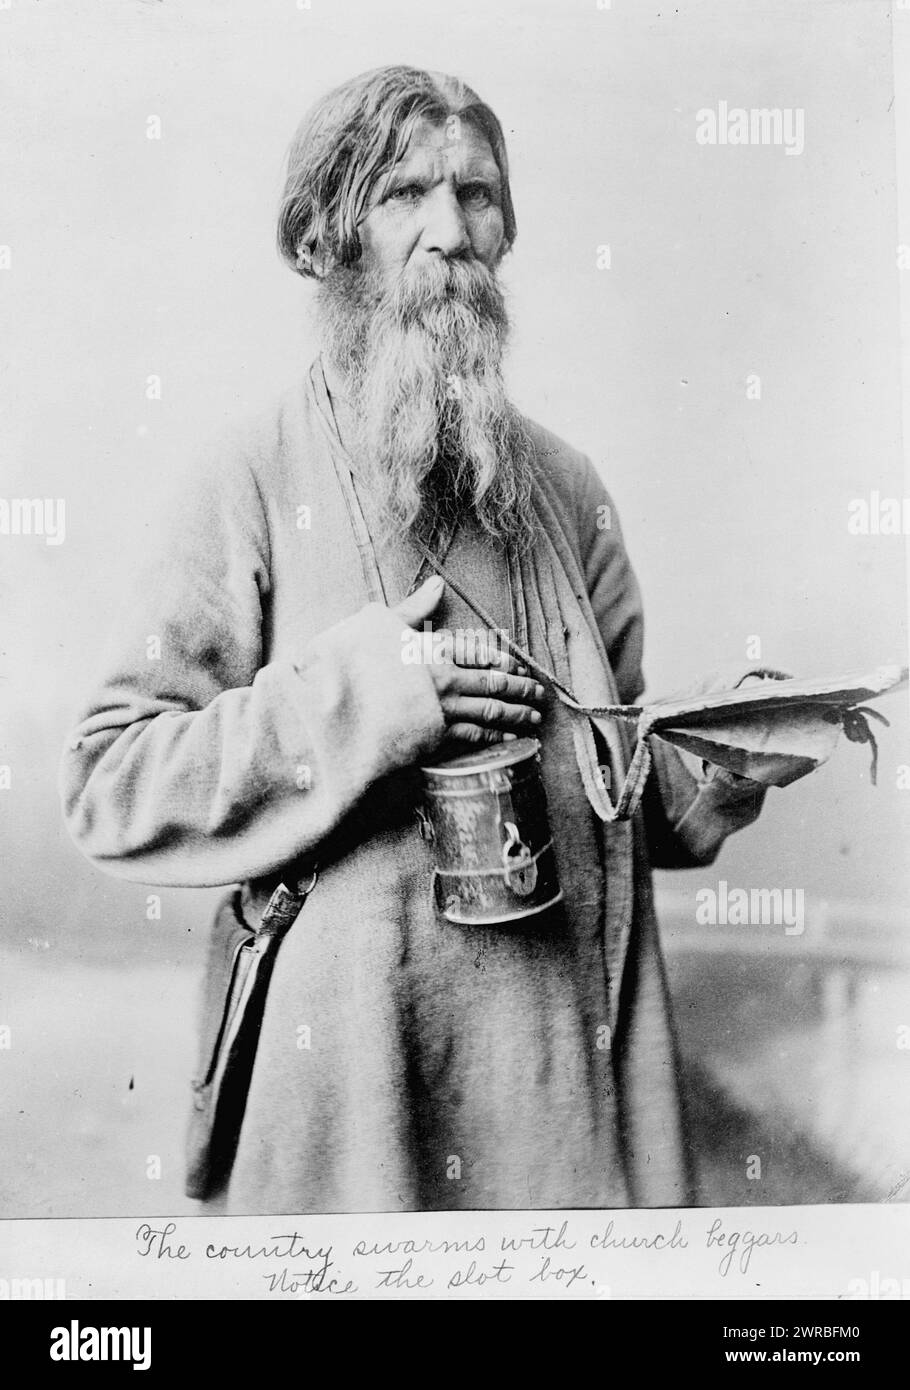 The Country swarms with church beggars, Bearded man, standing, three-quarter length, with box with slot to deposit money, Russia., between ca. 1880 and 1924, Beggars, Russia, 1880-1930, Photographic prints, 1880-1930., Portrait photographs, 1880-1930, Photographic prints, 1880-1930, 1 photographic print Stock Photo